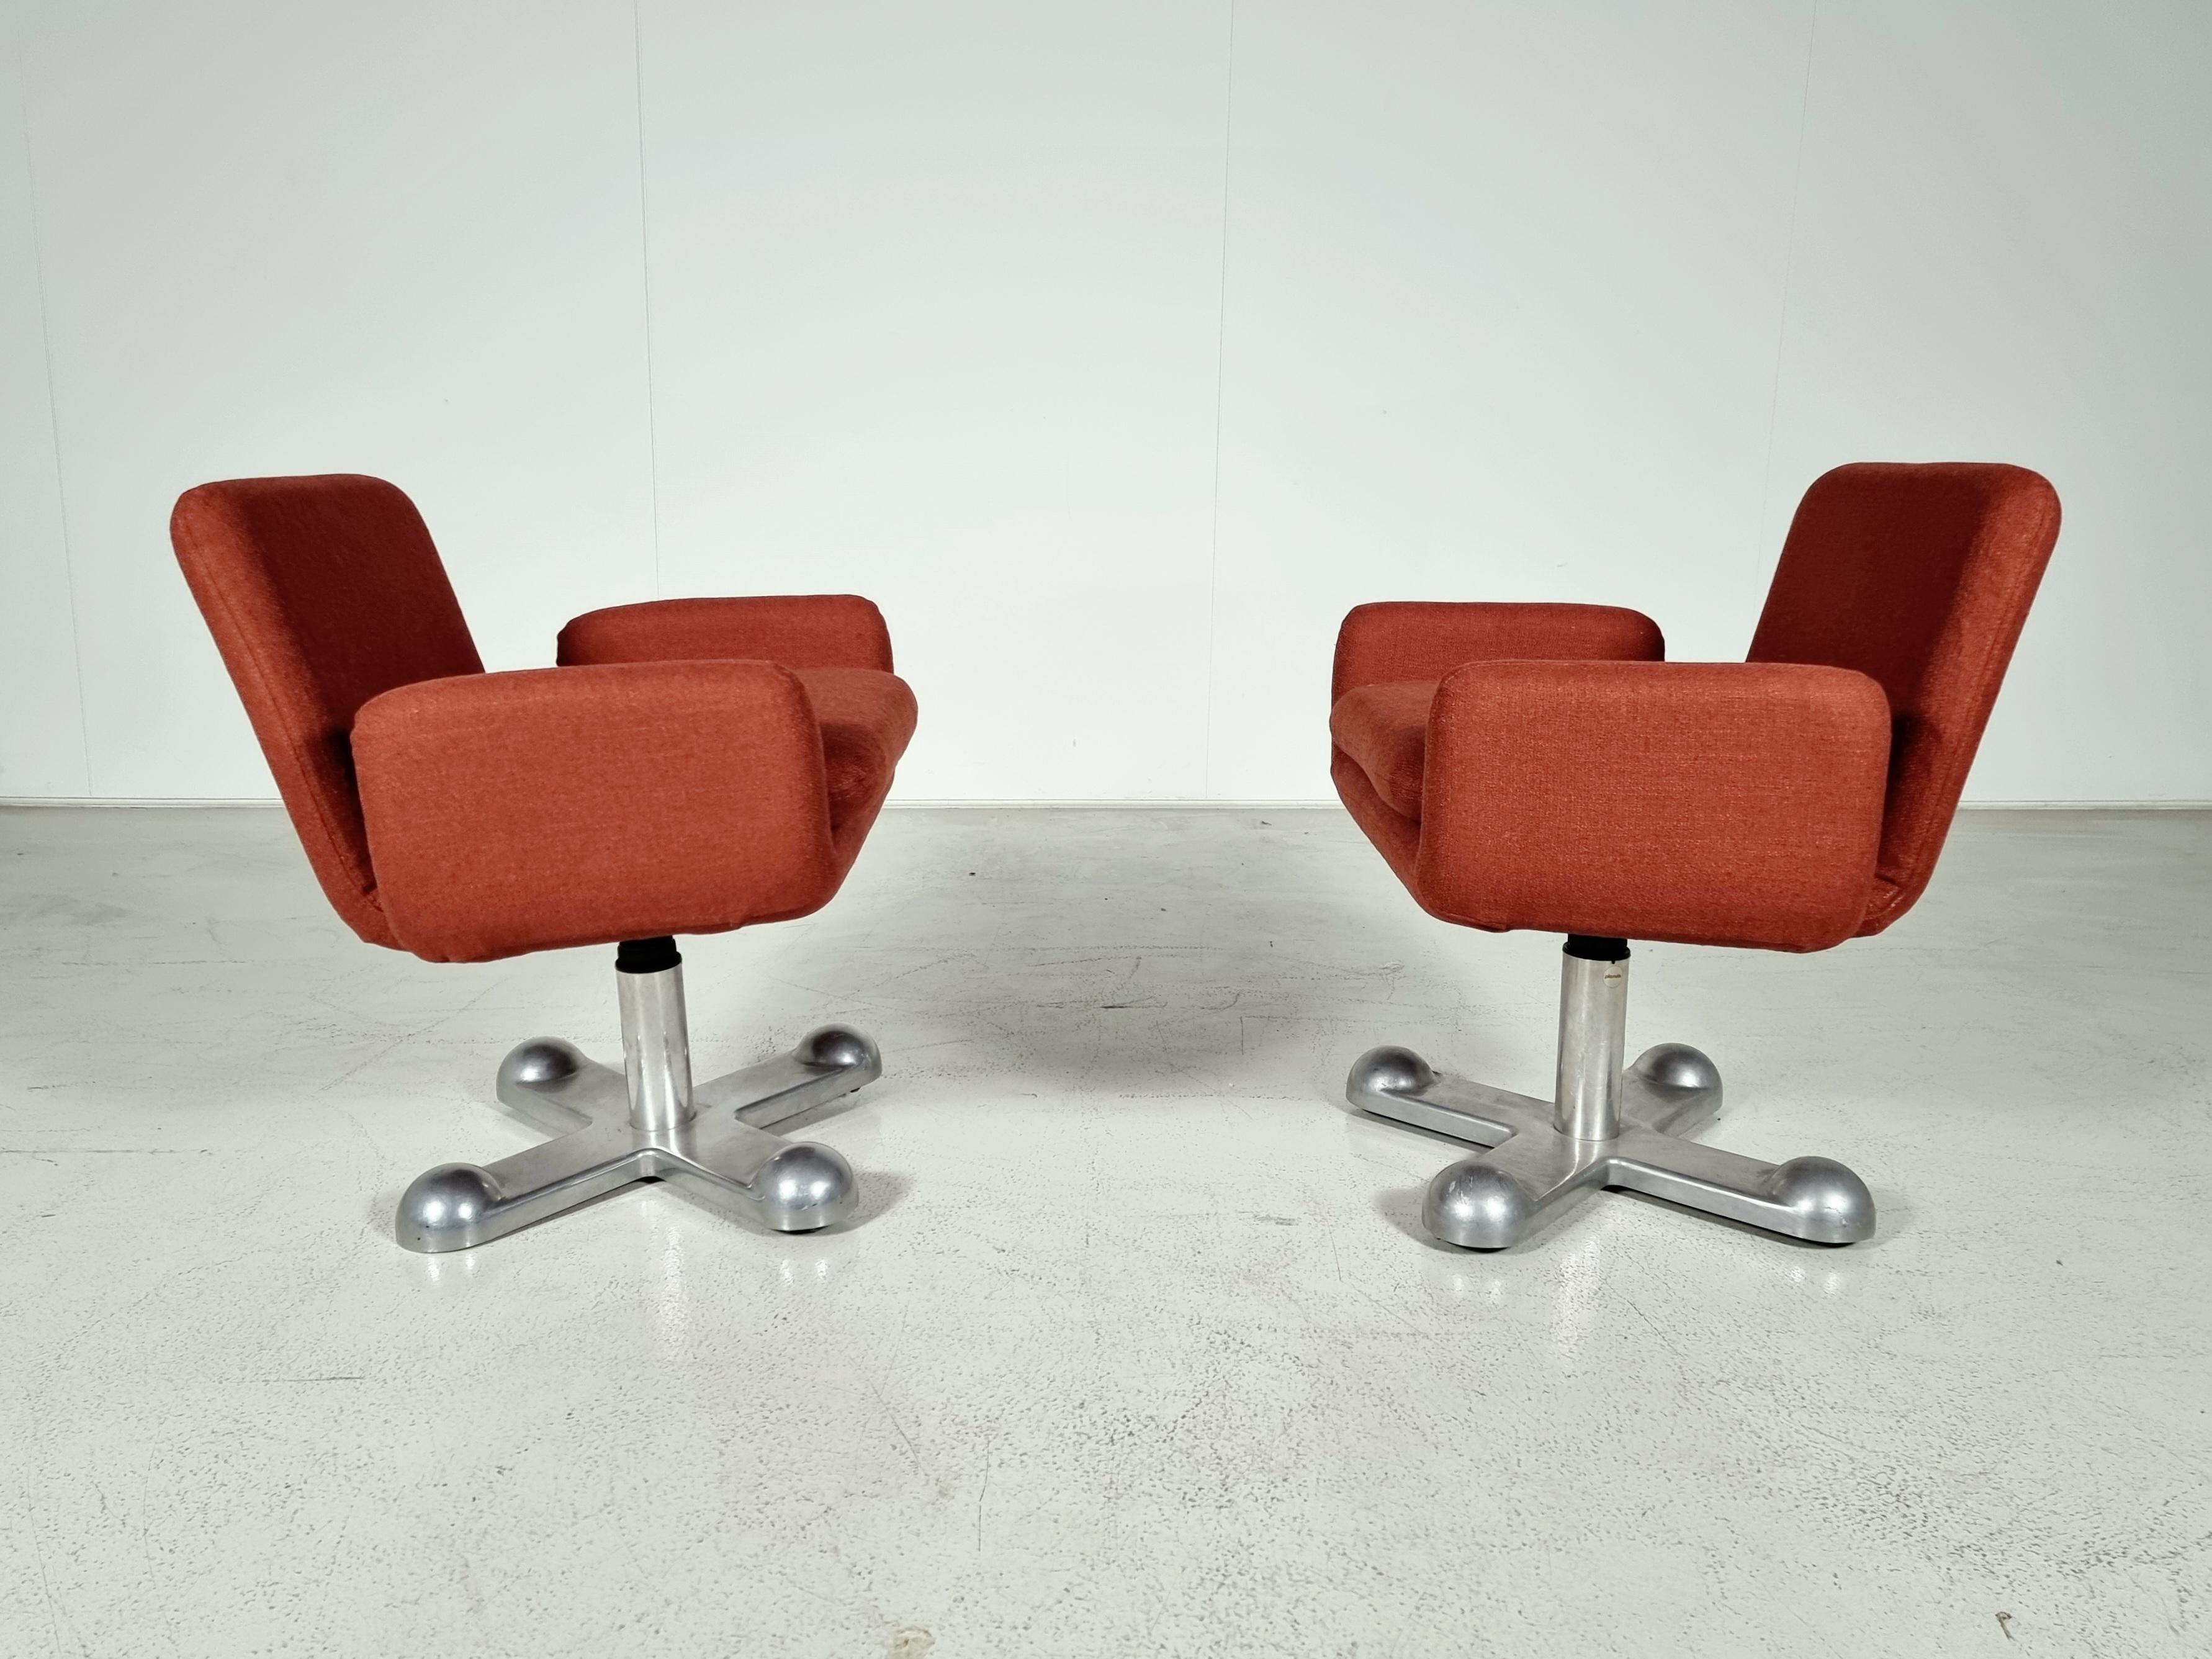 Late 20th Century Planula Swivel Desk Chairs by Perry King and Santiago Miranda, 1970s